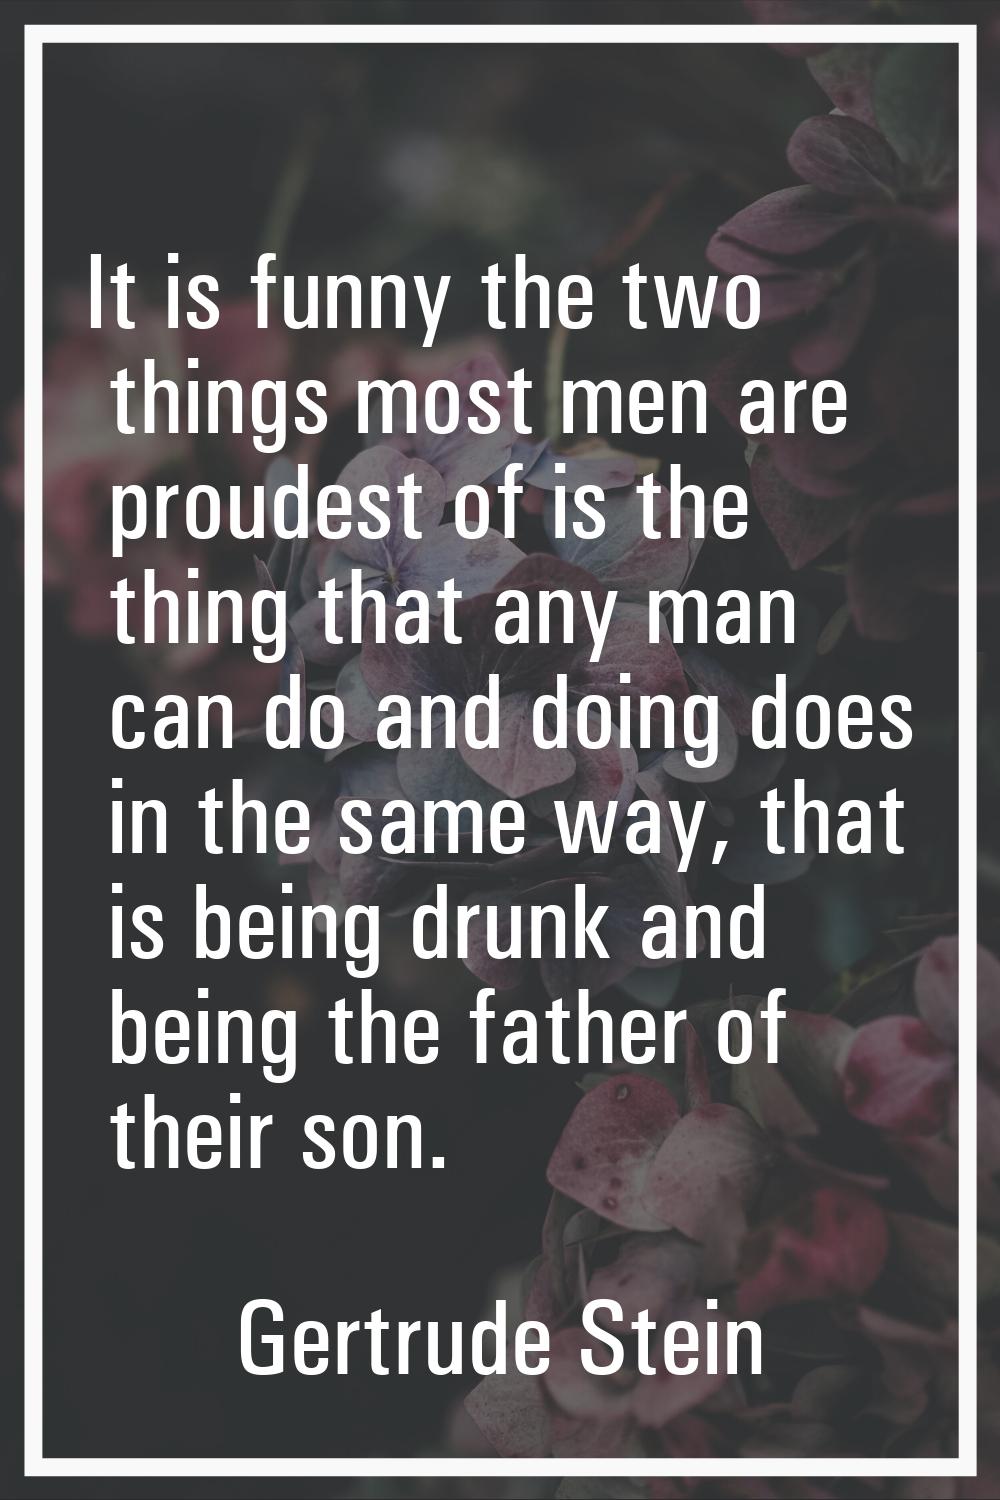 It is funny the two things most men are proudest of is the thing that any man can do and doing does